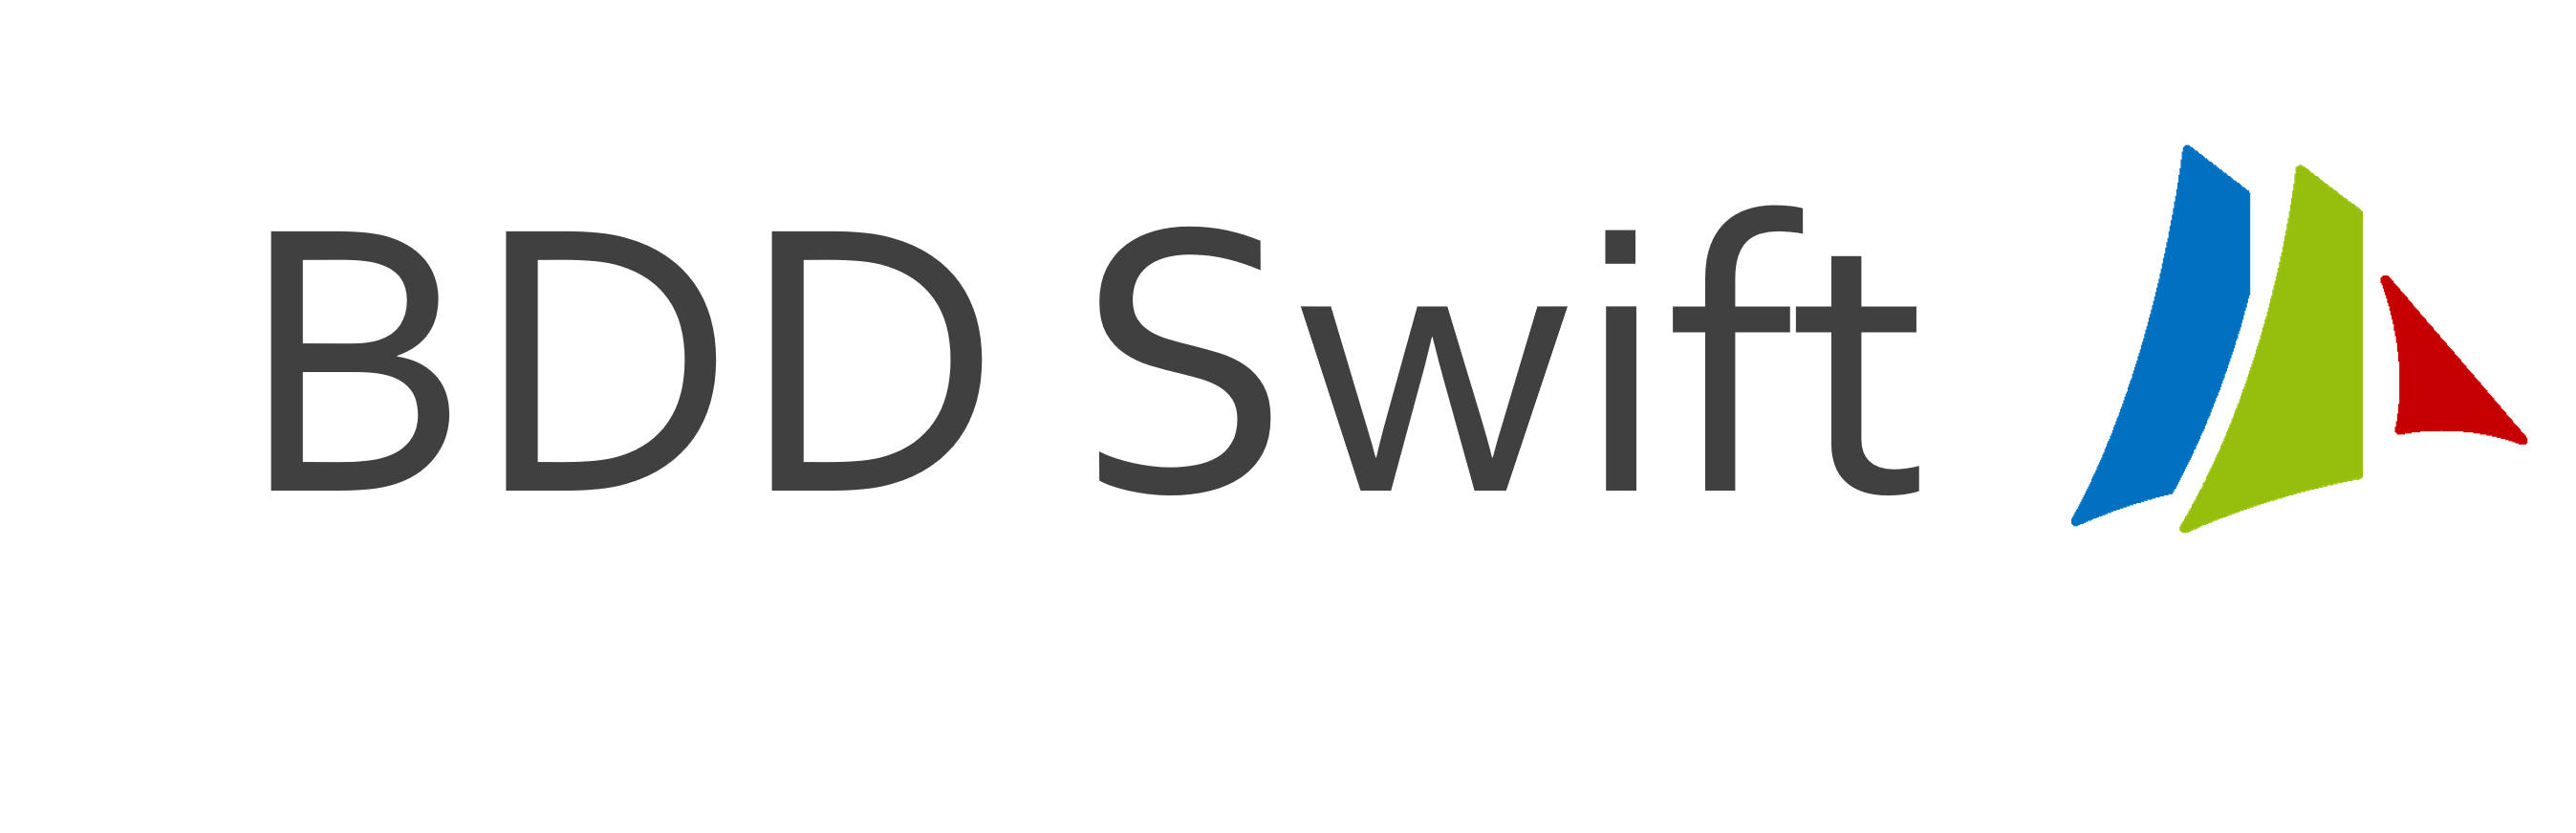 SWIFT accelerates evaluation and optimisation of product performance using in vivo clinical data to direct formulation design in real time.